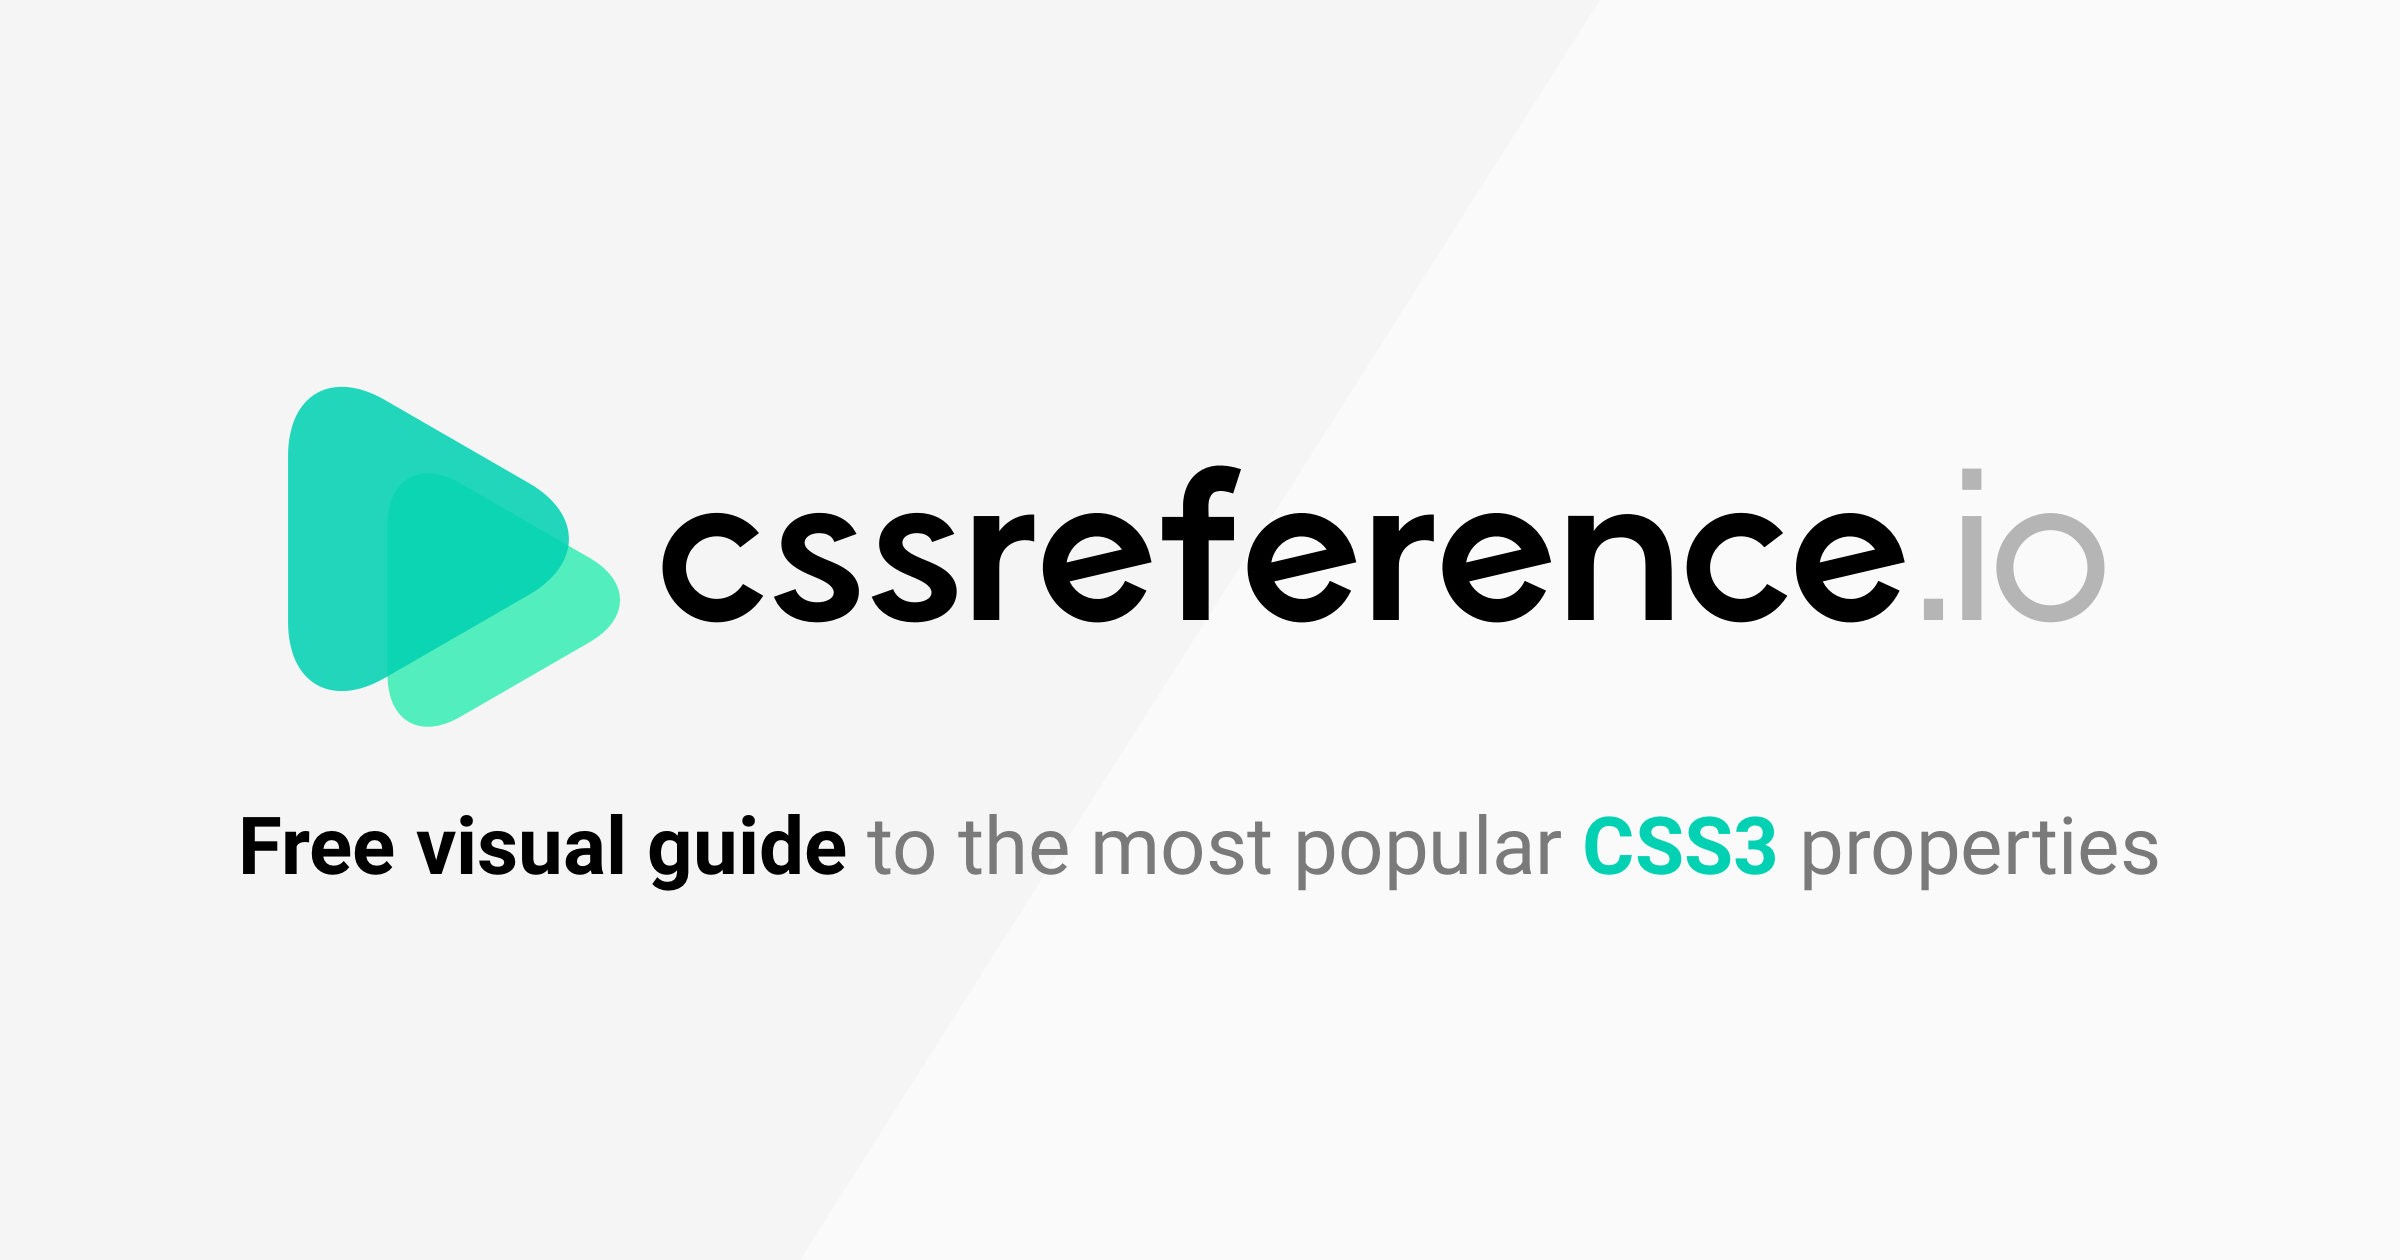 Reference Logo - CSS Reference - A free visual guide to CSS